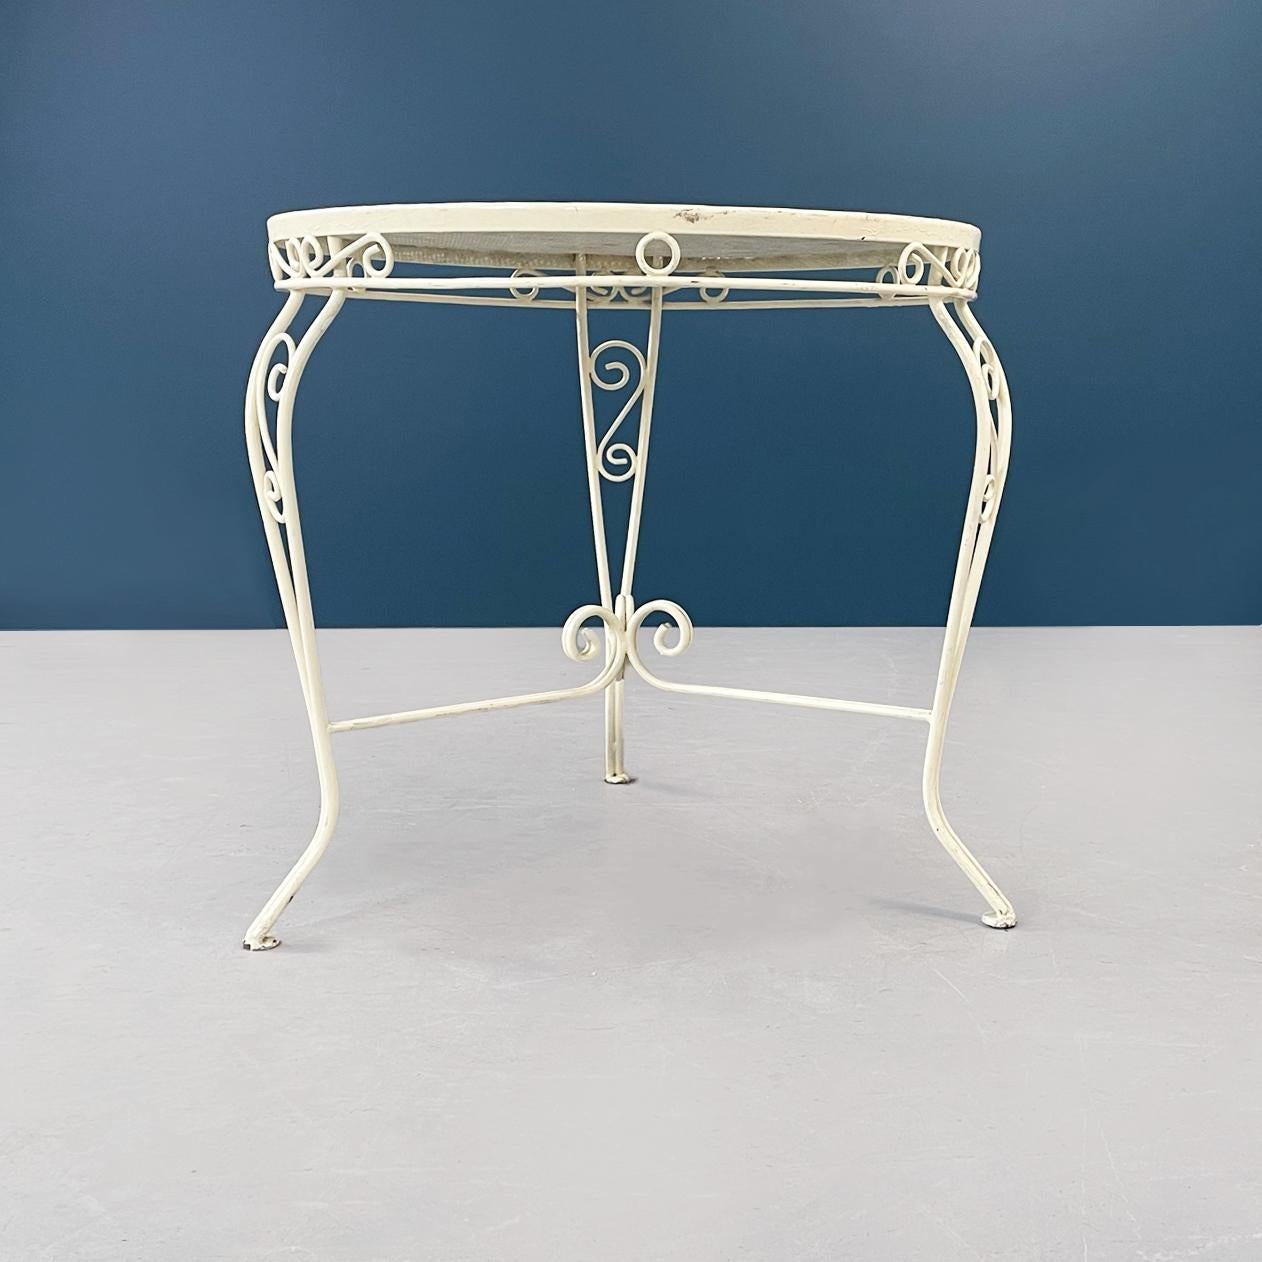 Italian Mid-Century Modern Garden Chairs and Table in White Wrought Iron, 1960s For Sale 9